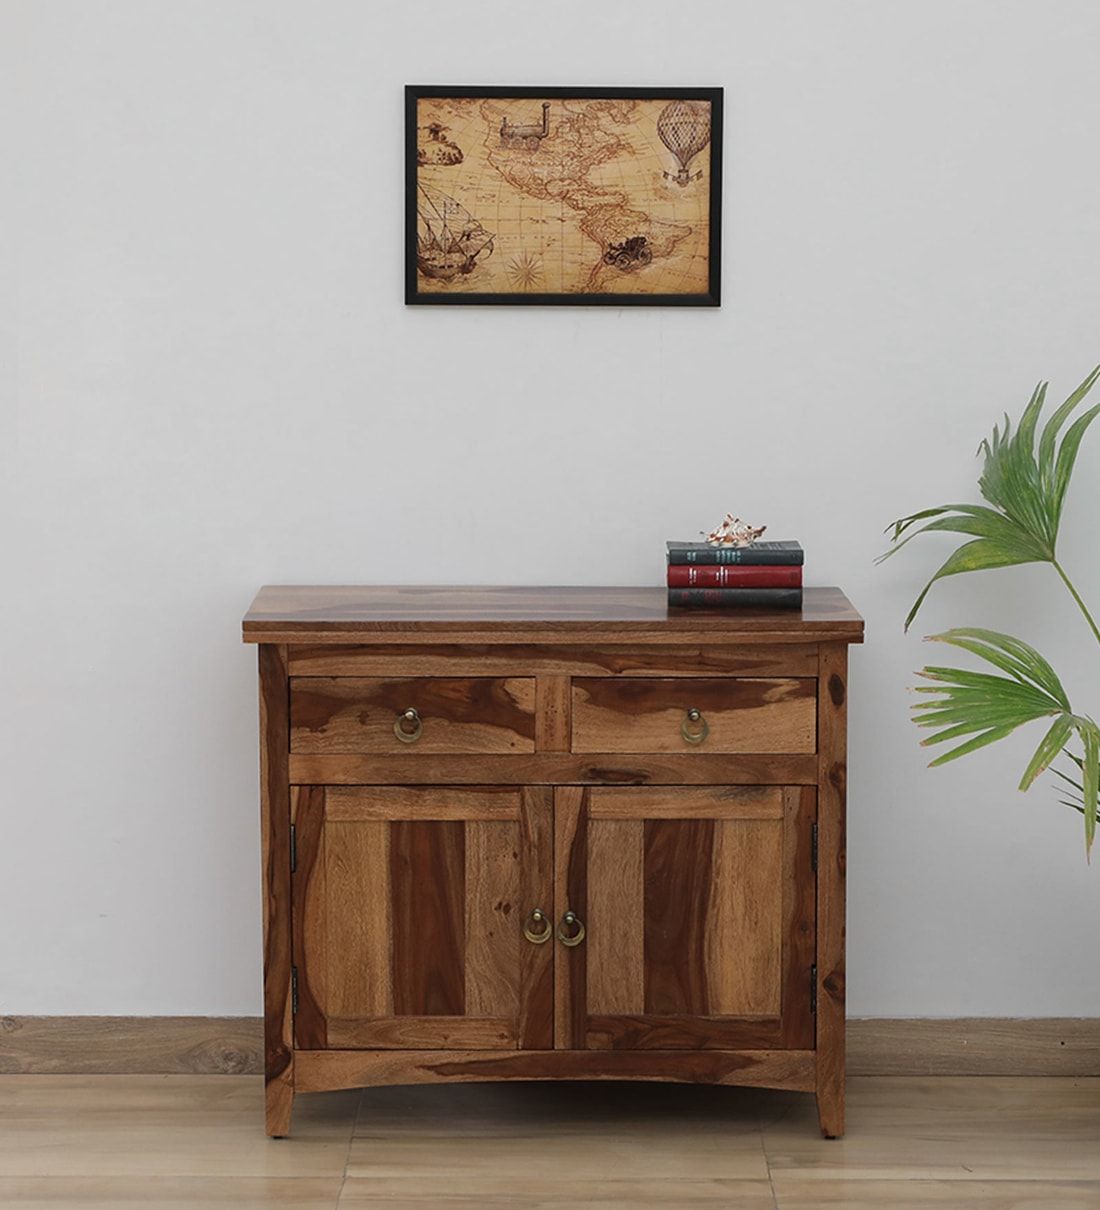 Buy Biscay Sheesham Wood Sideboard In Scratch Resistant Rustic Teak Finish Woodsworth From Pepperfry | Pepperfry In Brown Finished Wood Sideboards (View 5 of 15)